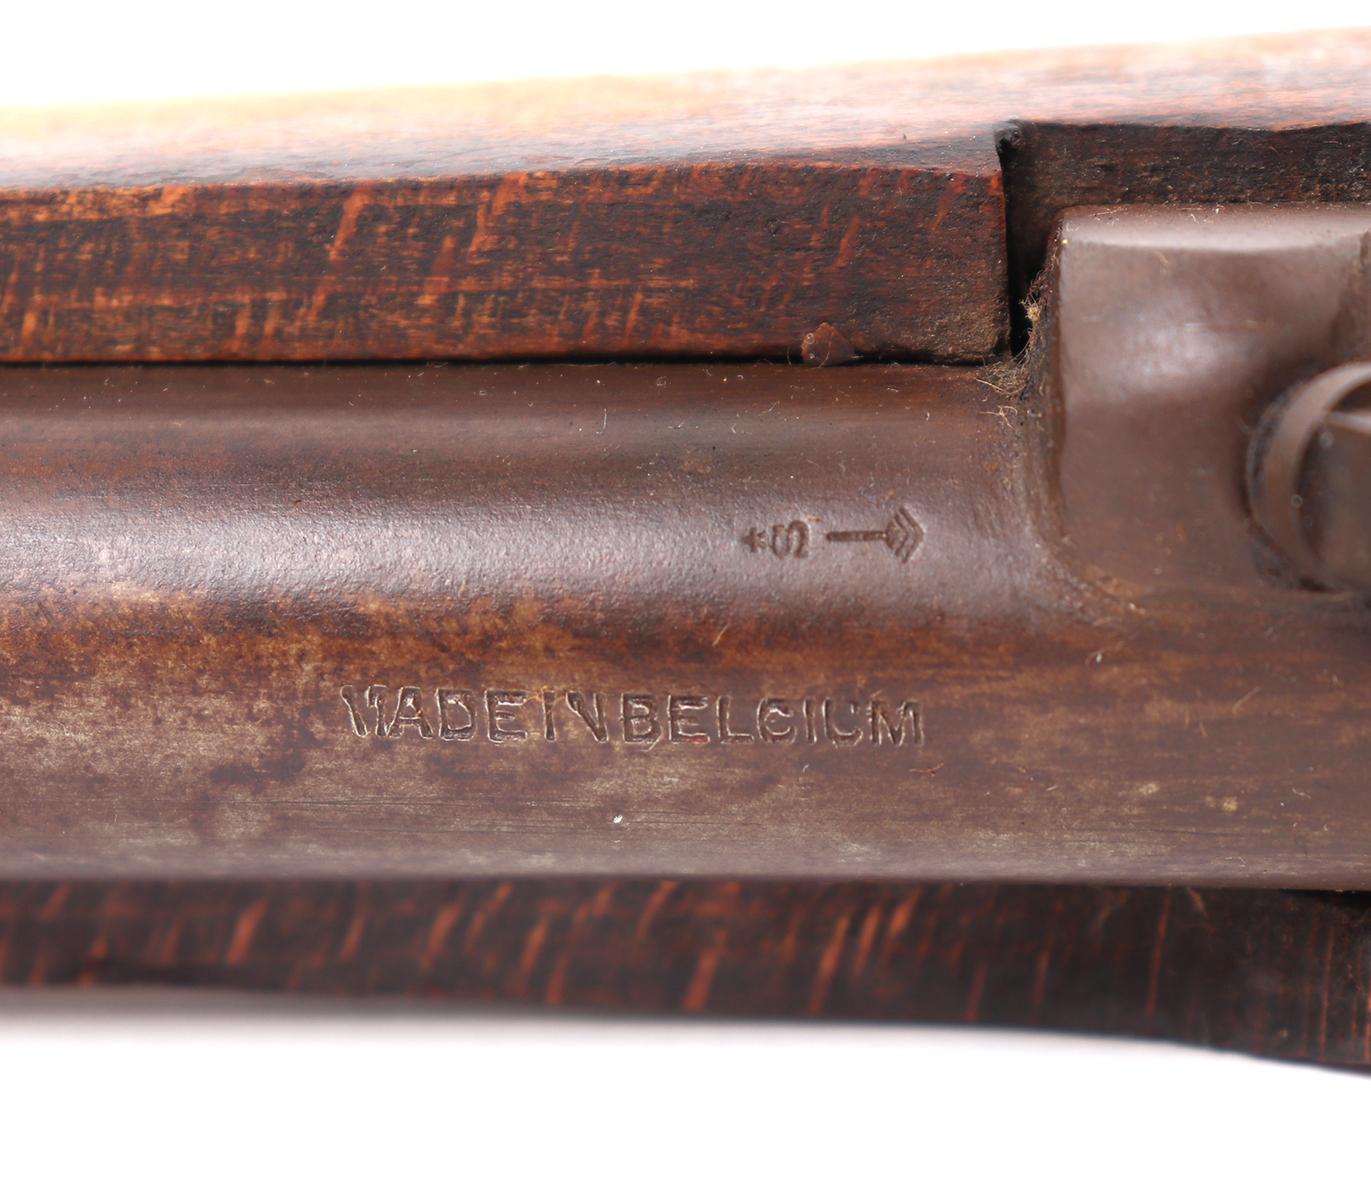 Belgian Percussion Trade Musket Rifle